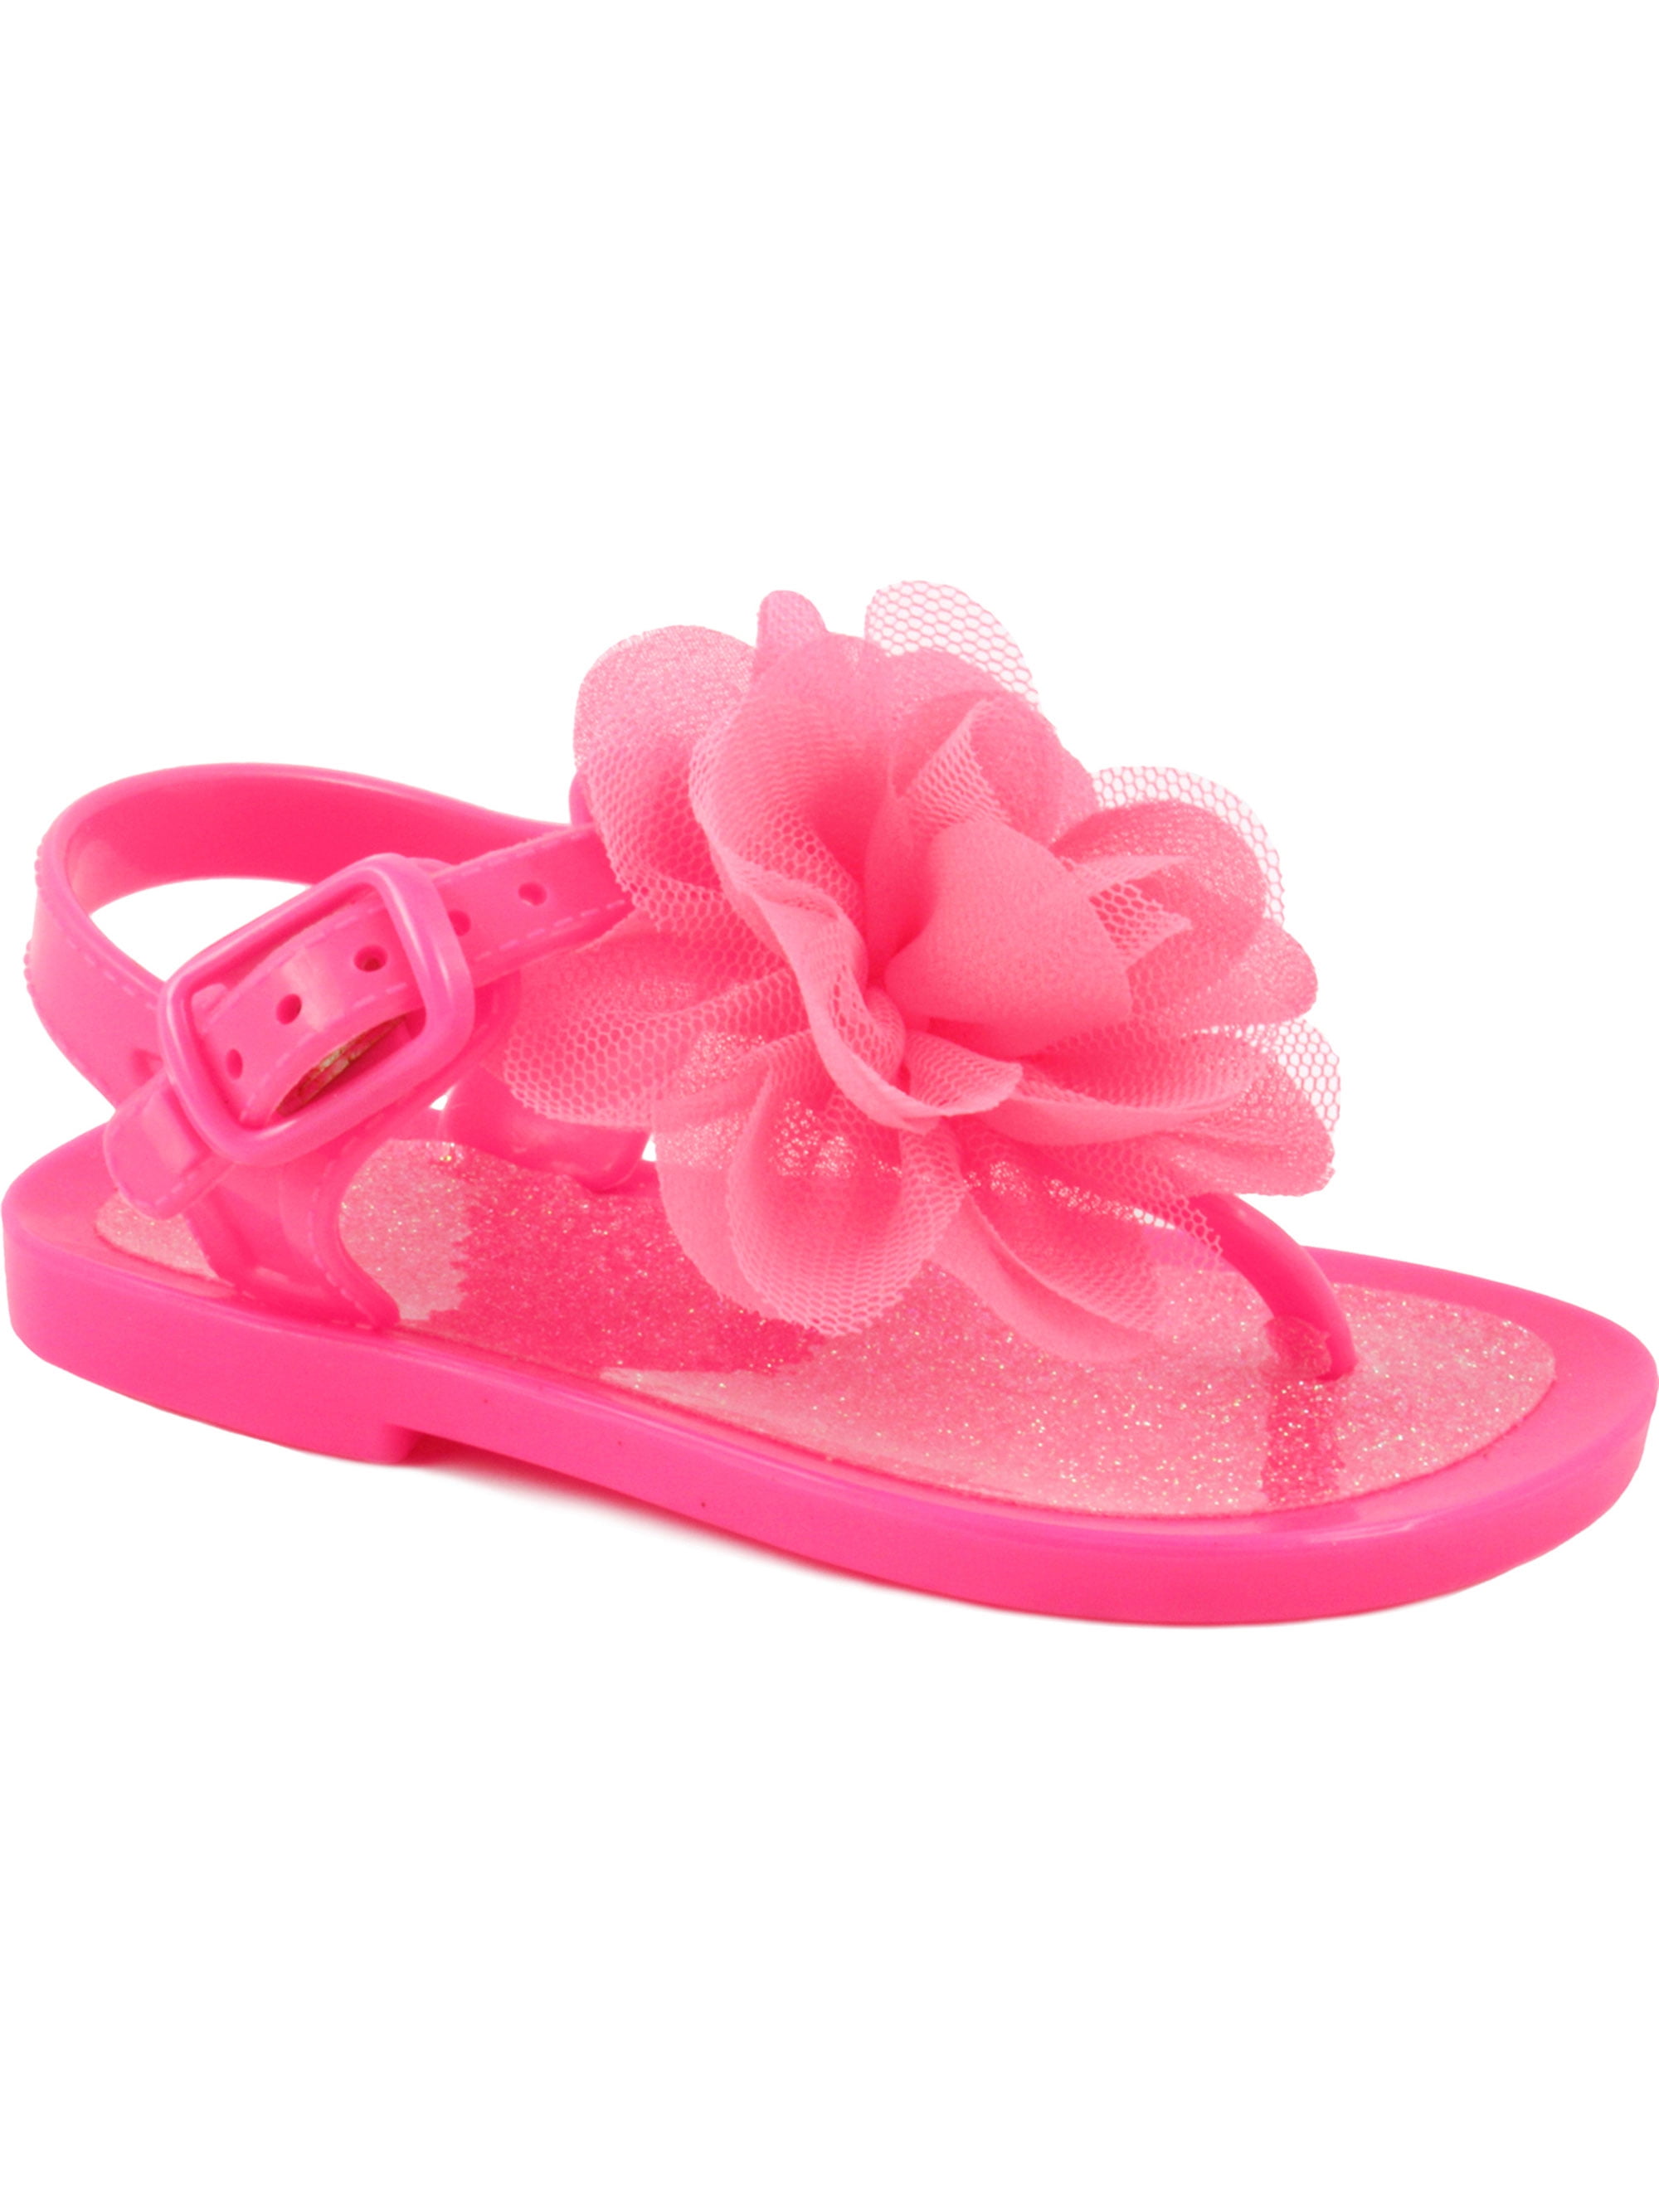 infant jelly shoes